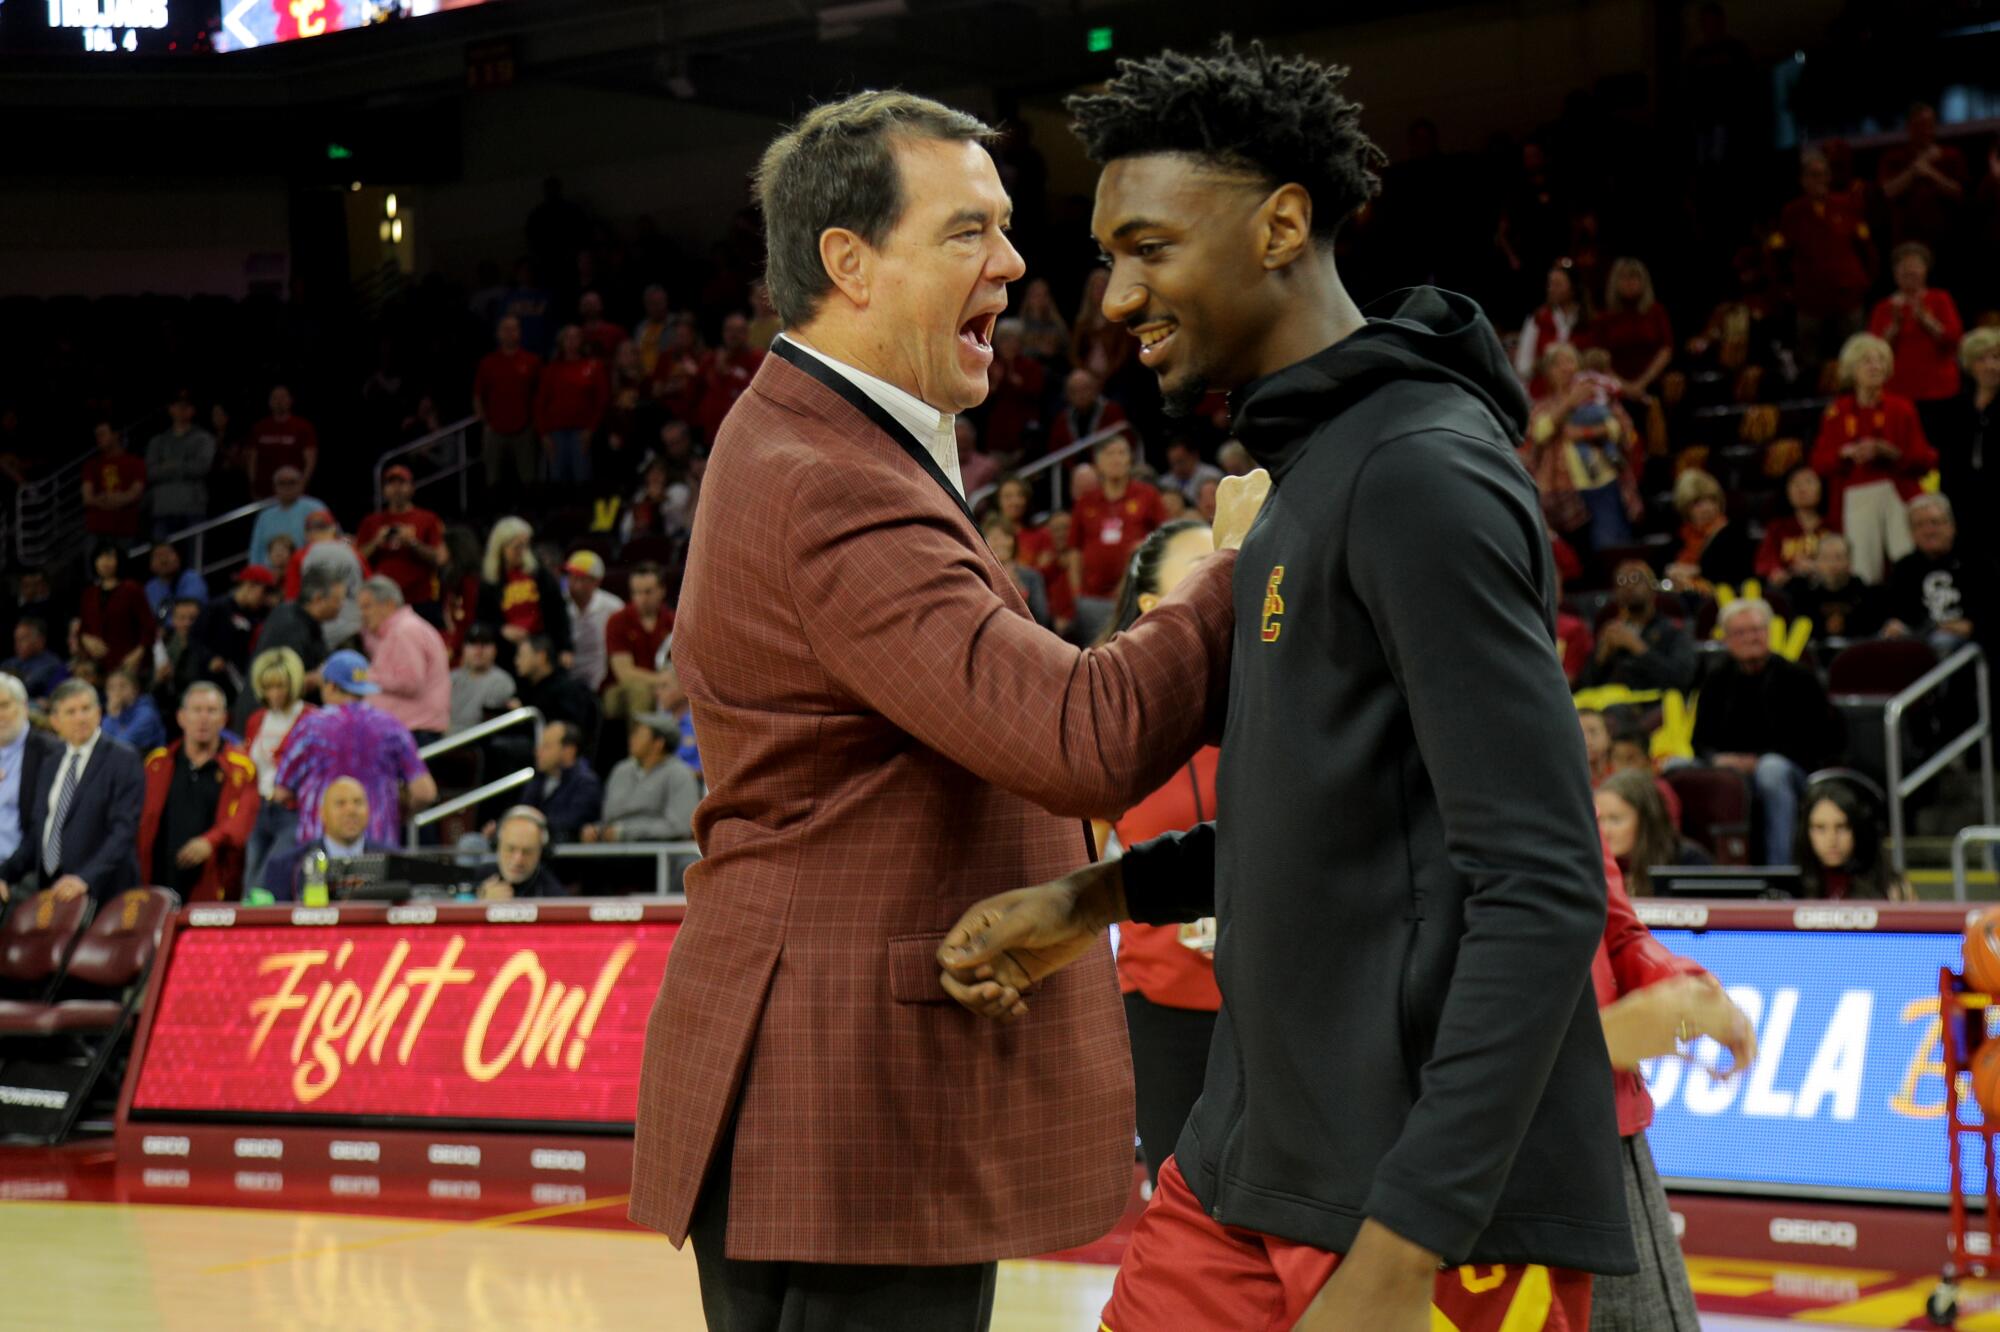 USC athletic director Mike Bohn congratulates guard Jonah Mathews on the basketball court while a crowd look on